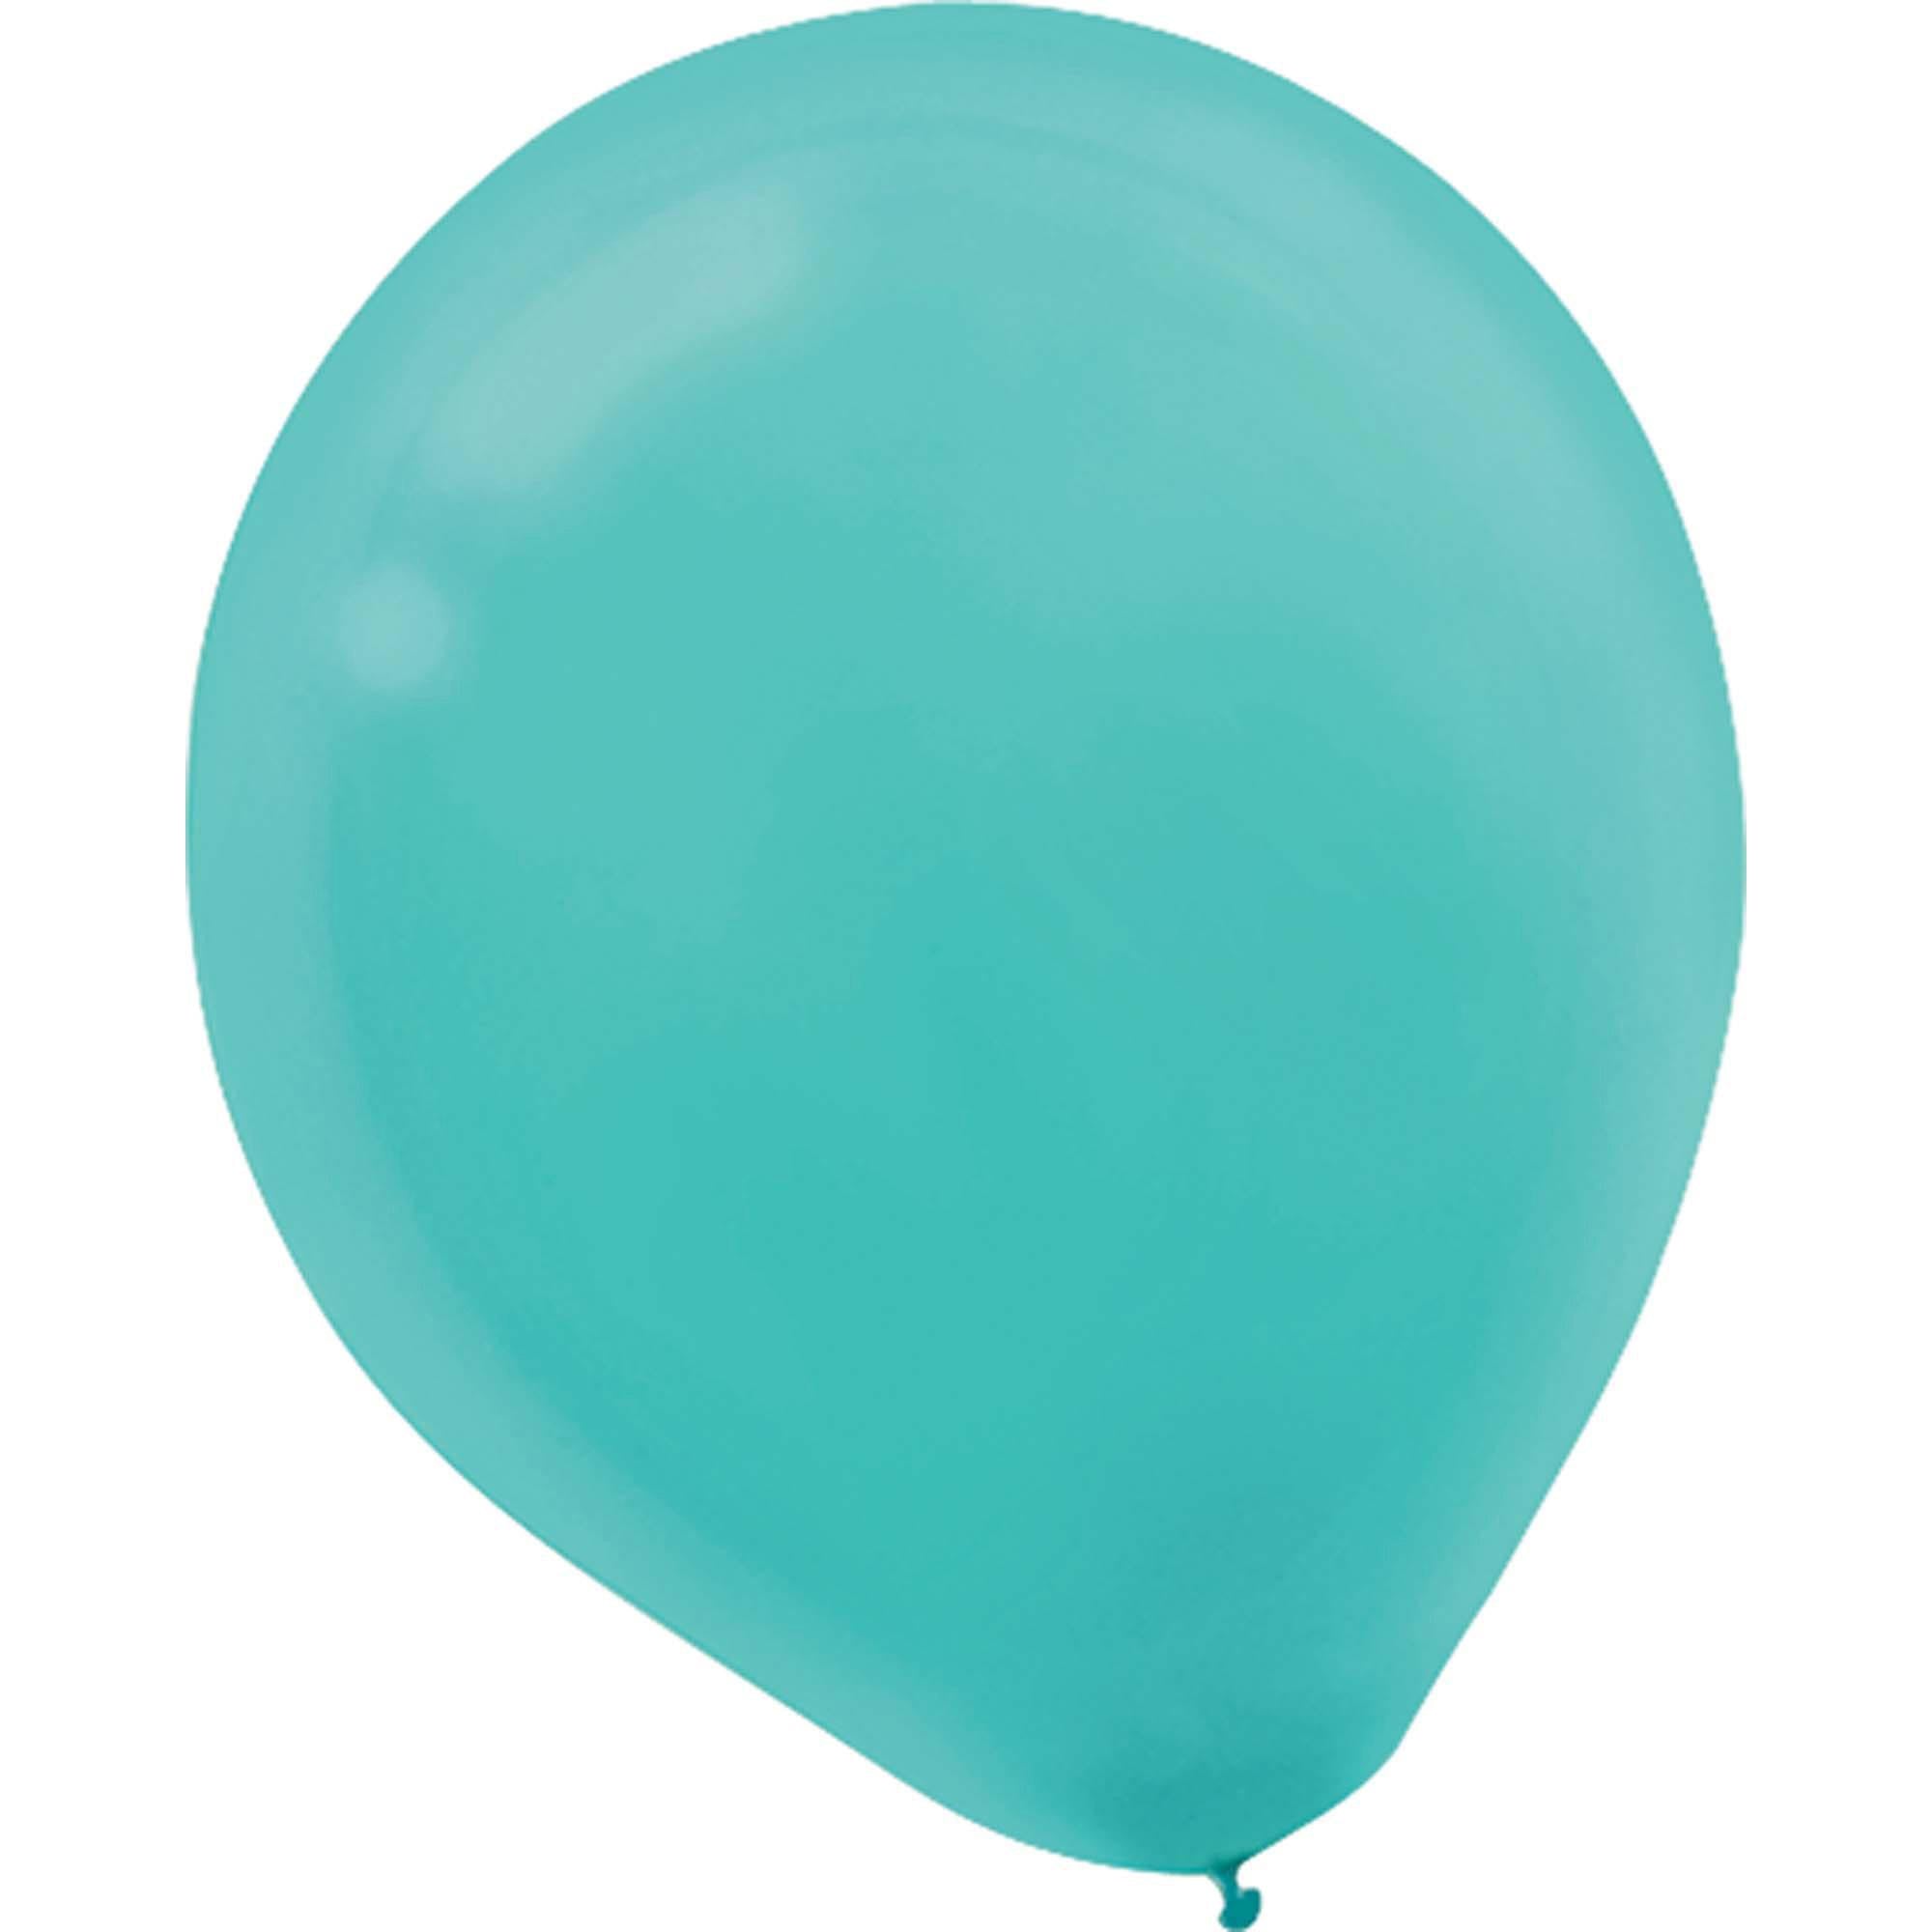 Standard Robins Egg Blue Latex Balloons 12in, 50pcs Balloons & Streamers - Party Centre